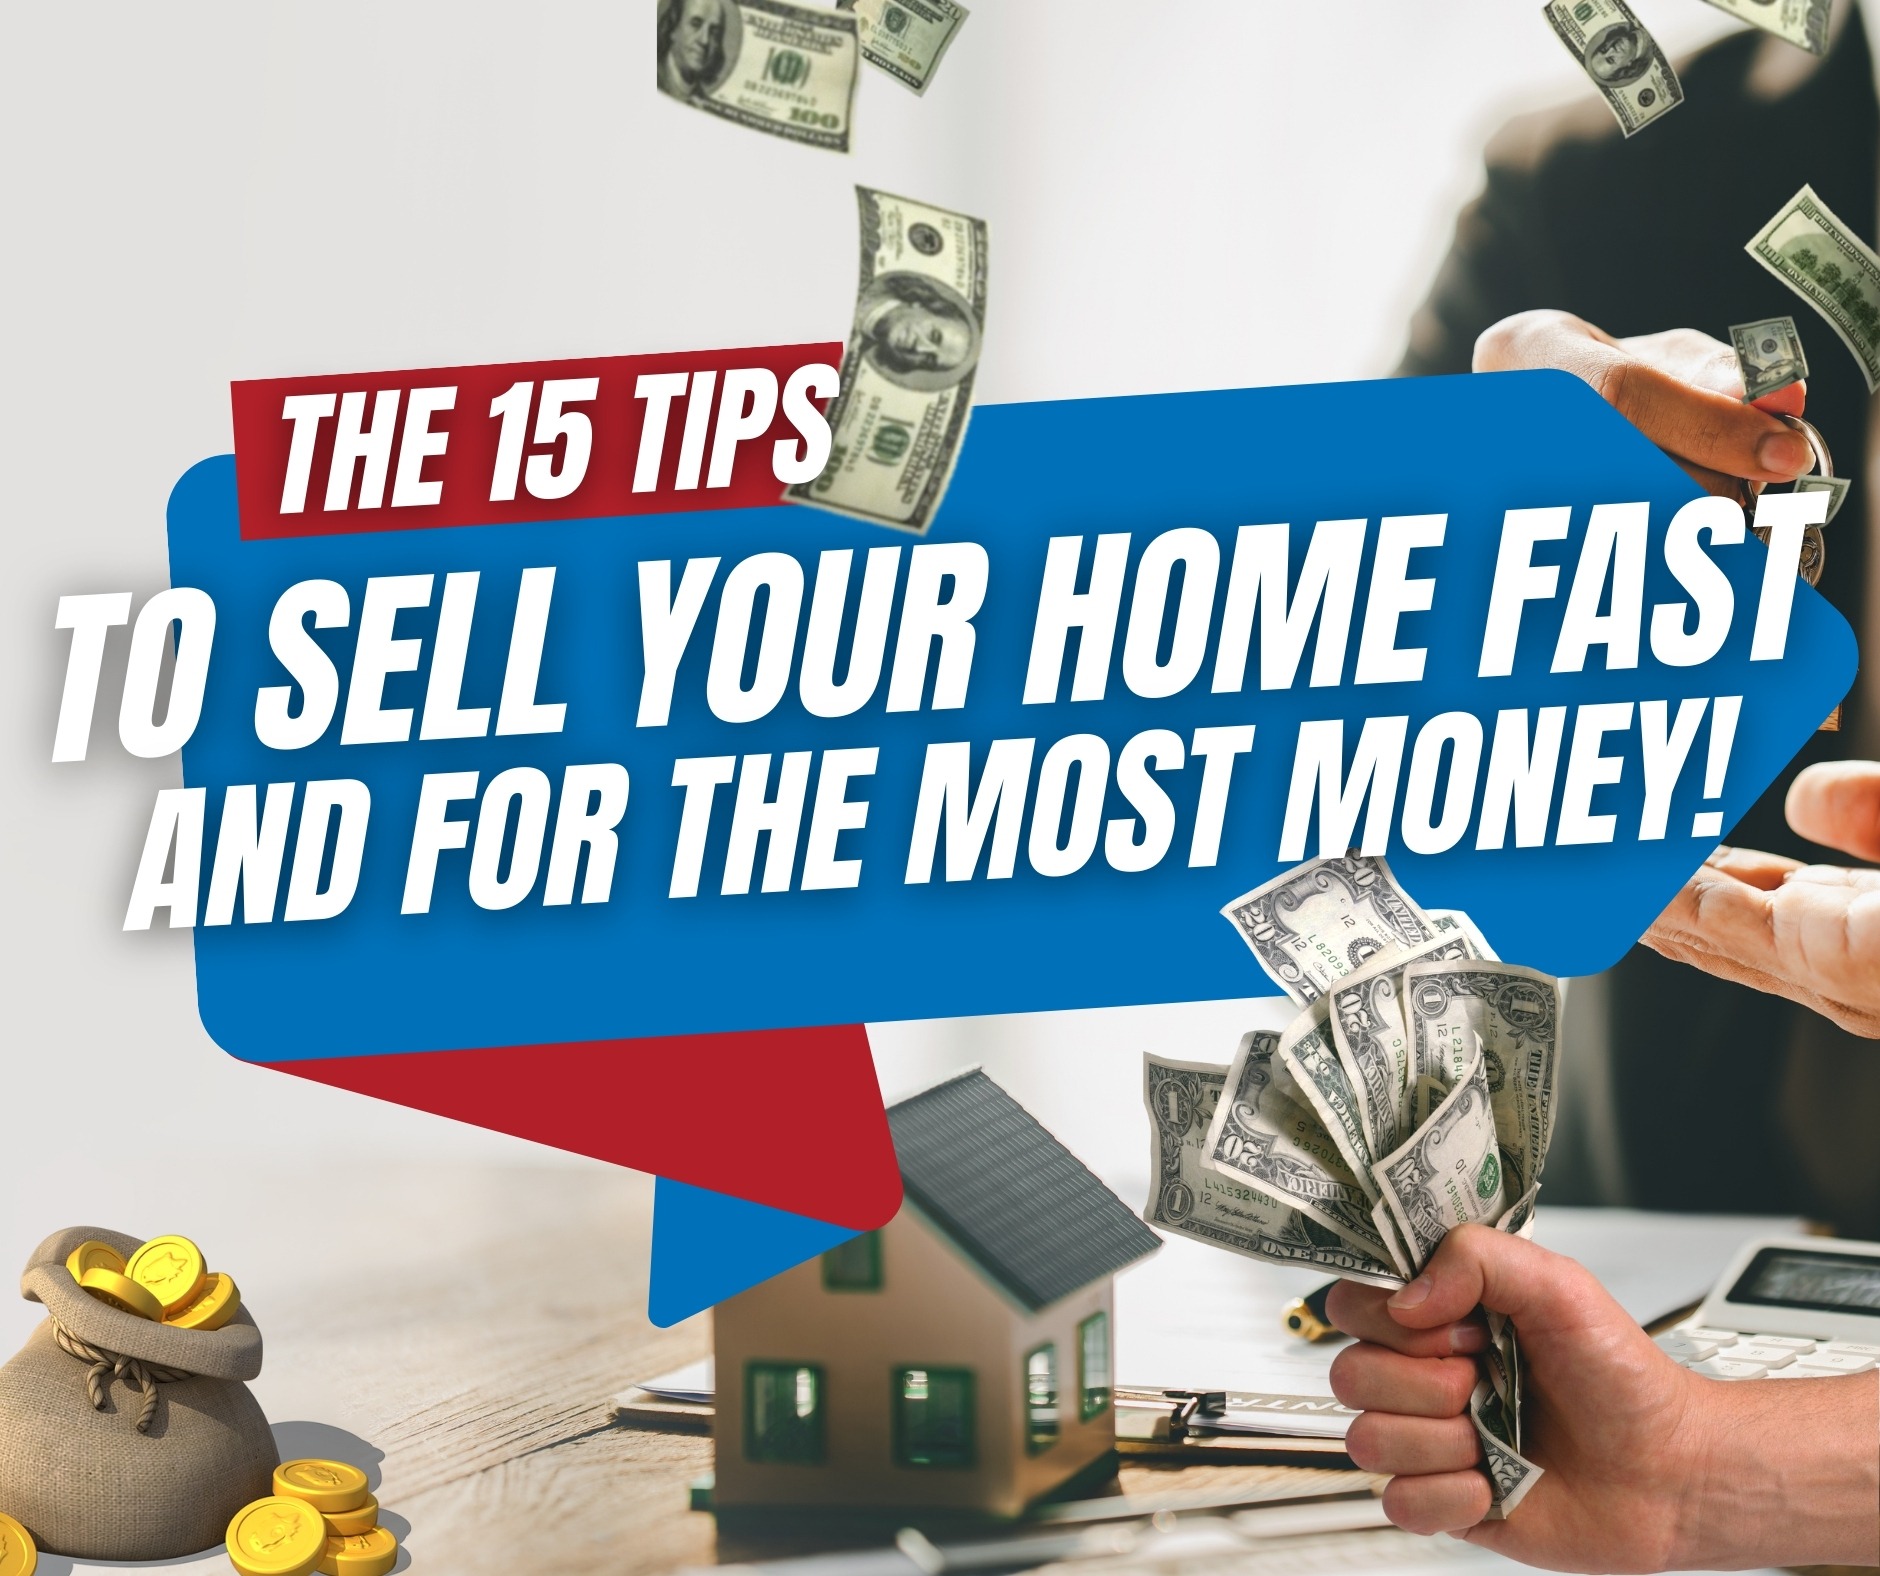 The 15 Tips To Sell Your Home Fast And For The Most Money